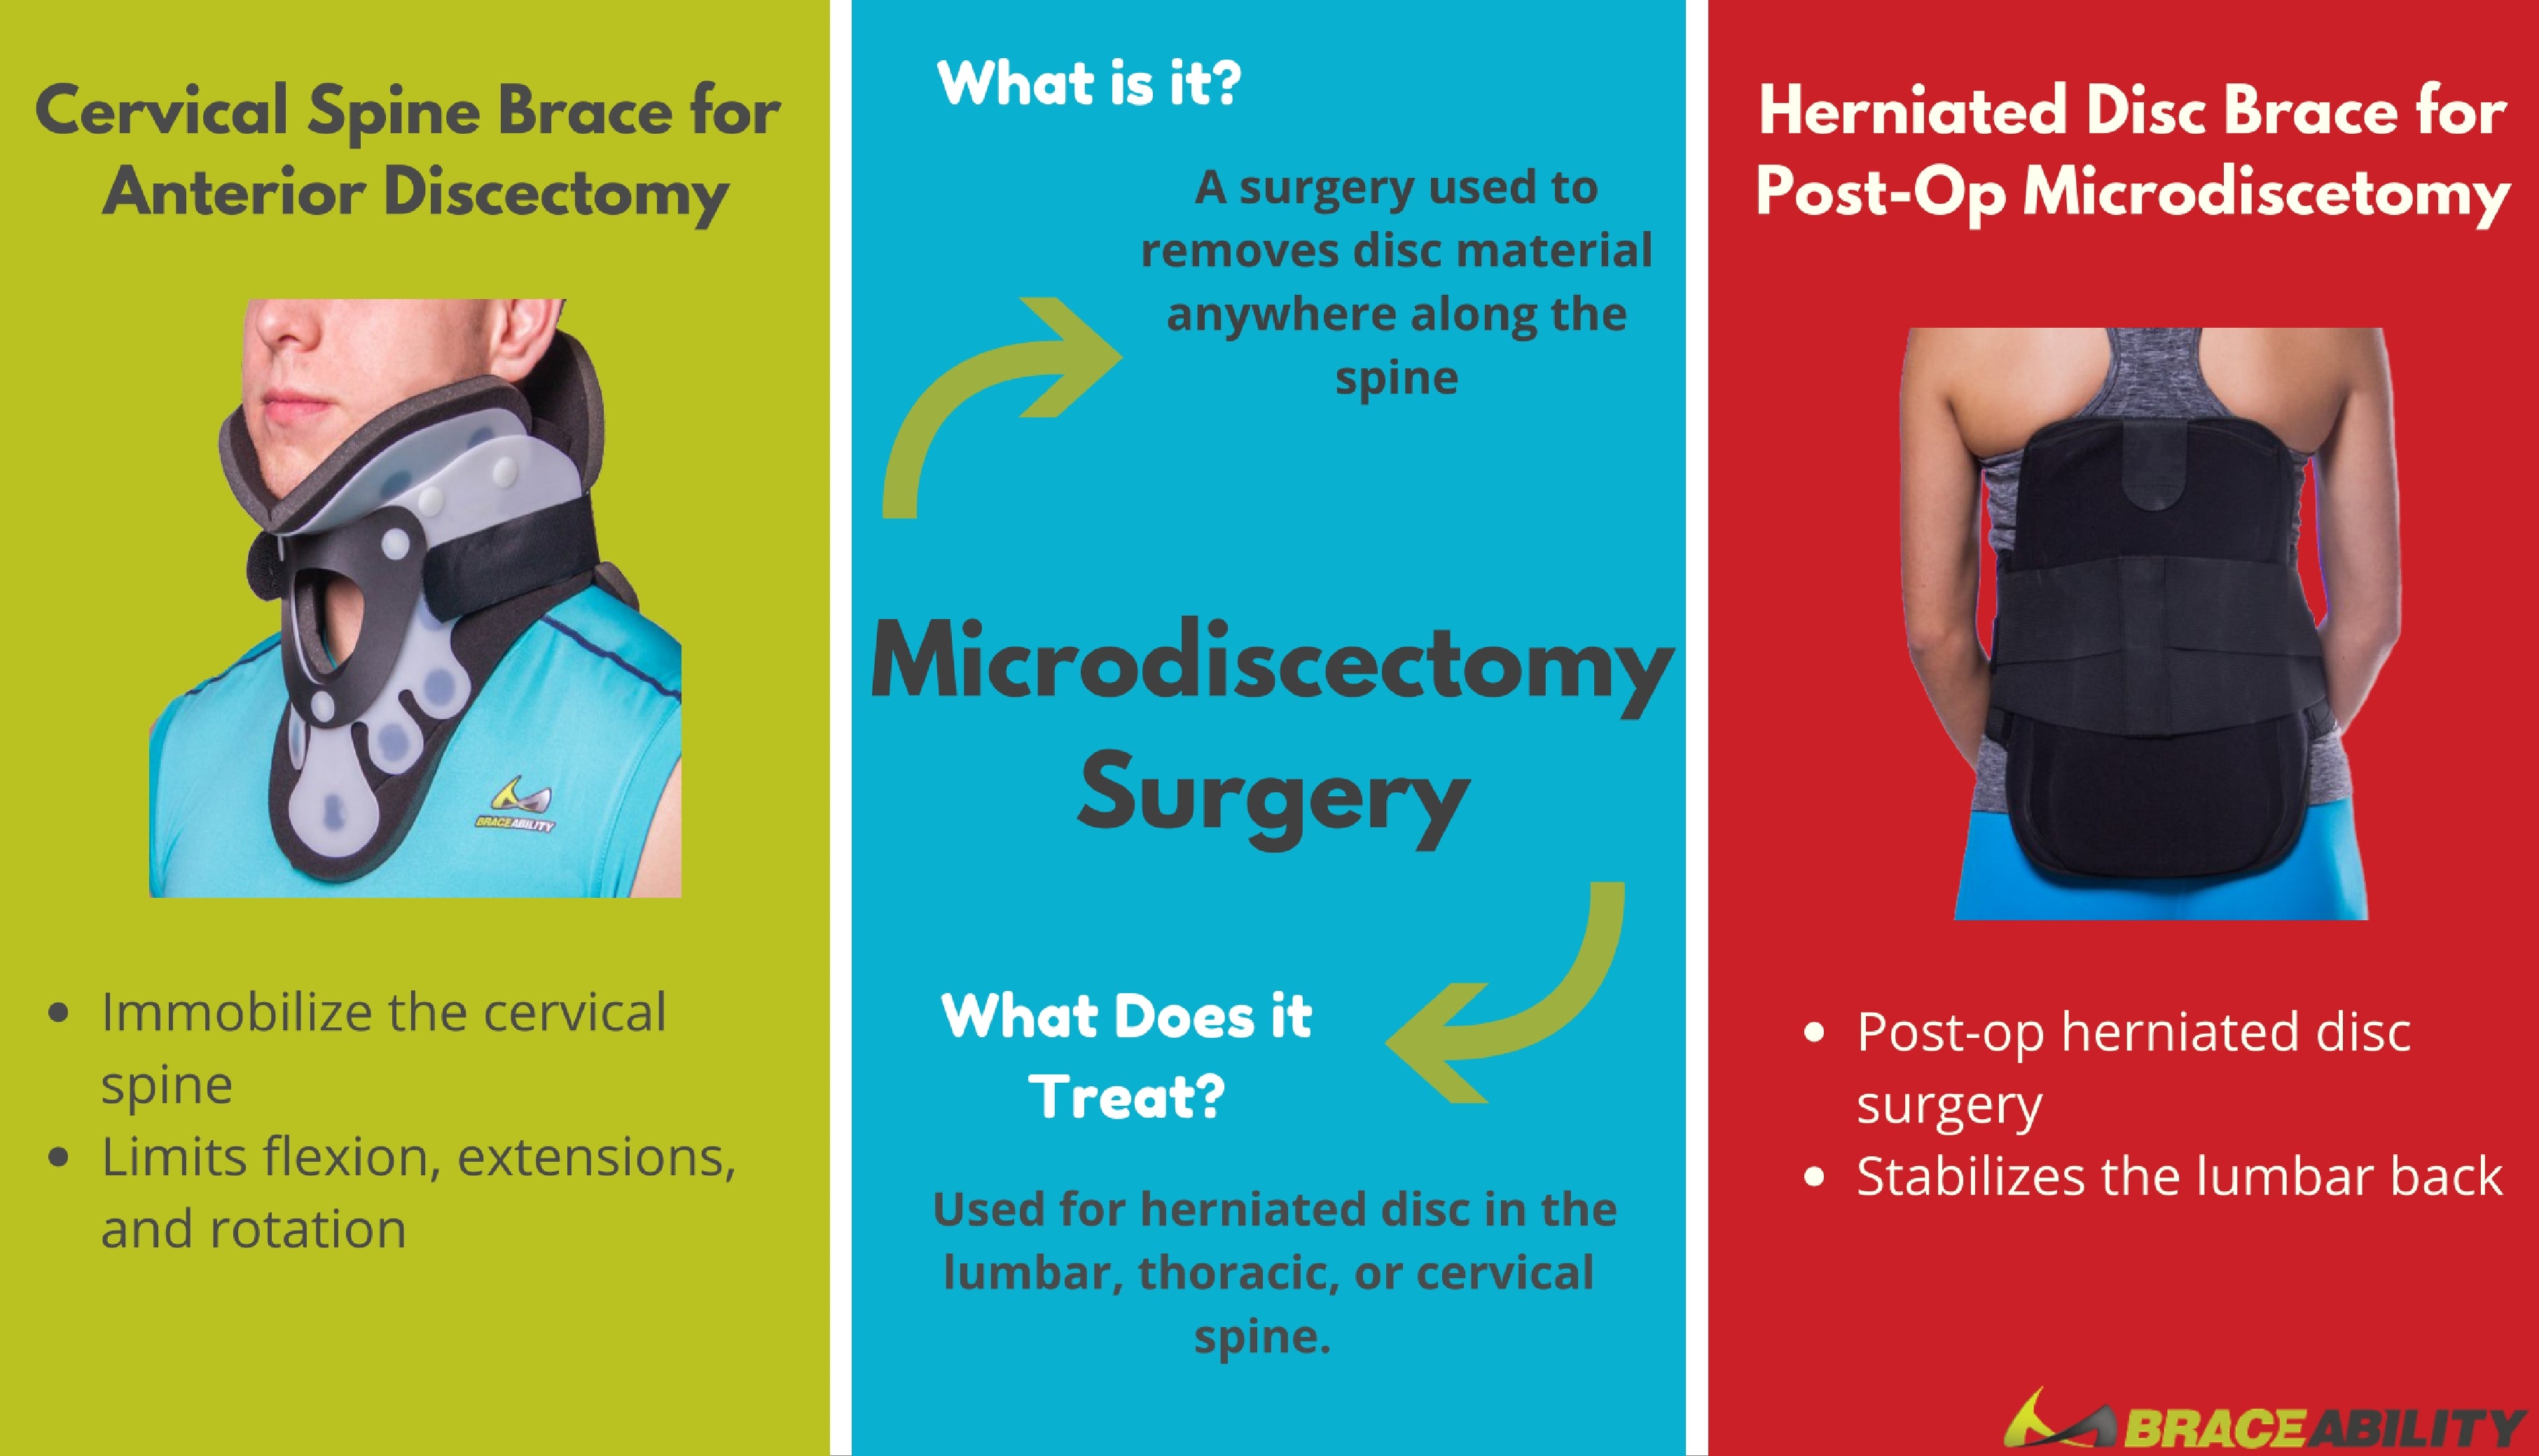 Do You Need a Back Brace after Microdiscectomy Surgery?